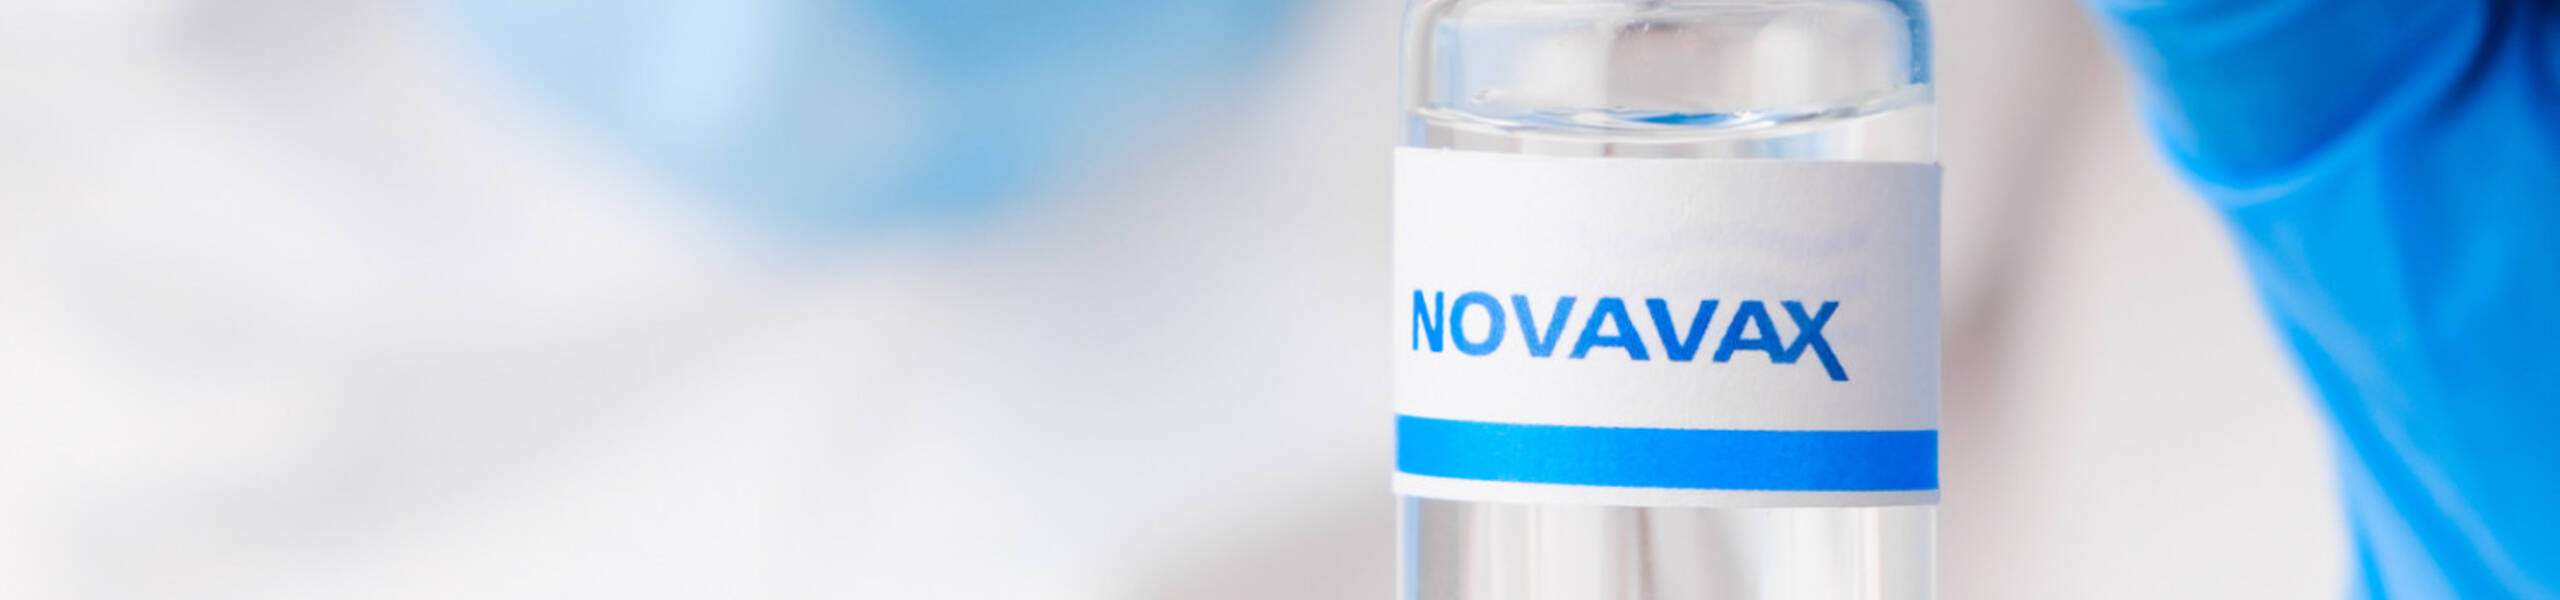 What is happening with Novavax?